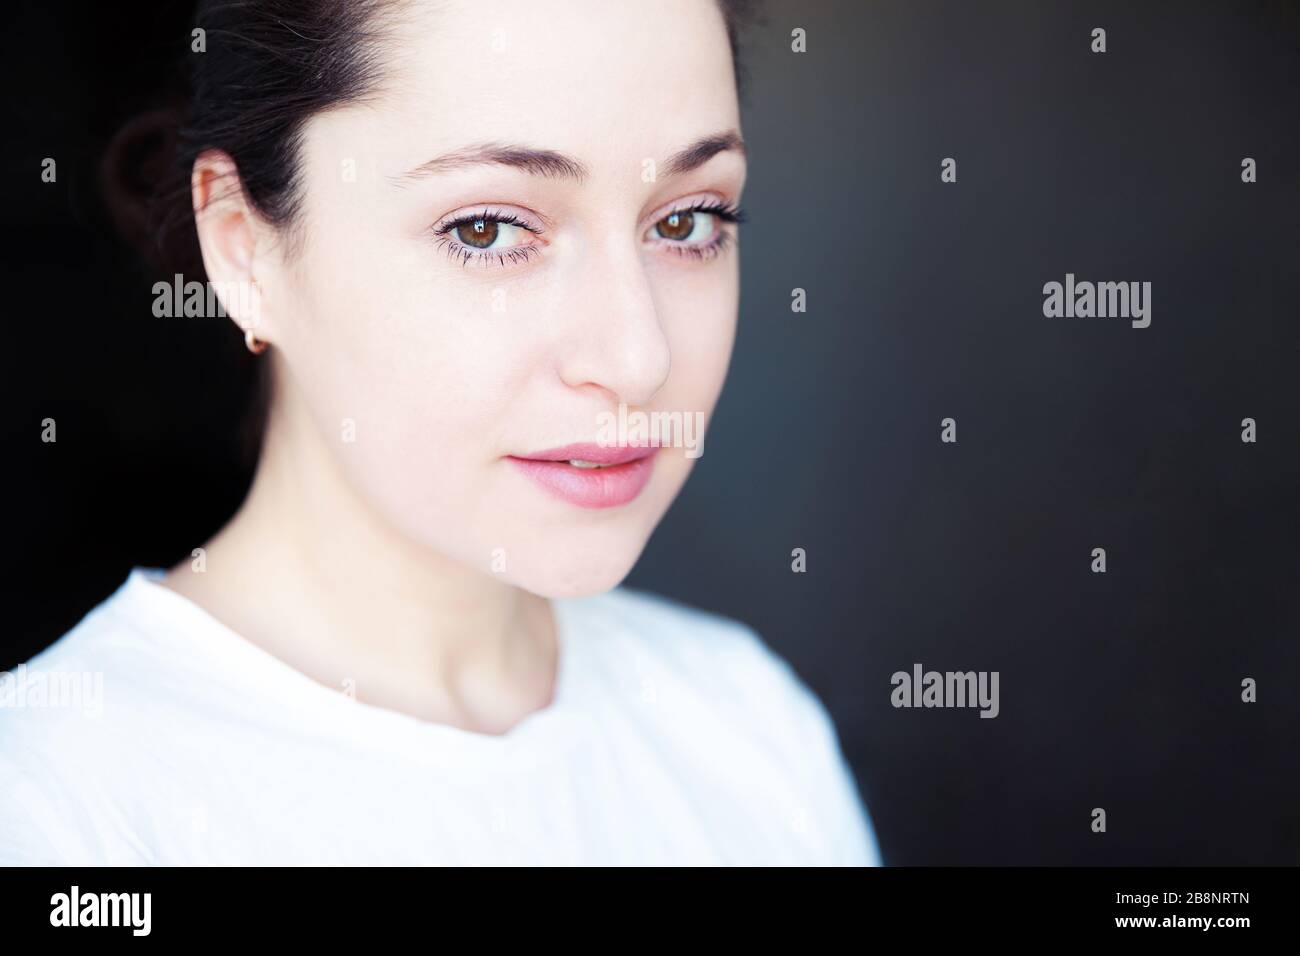 Happy girl smiling. Beauty portrait young happy positive brunette woman on black background isolated. European woman headshot. Positive human emotion facial expression body language Stock Photo